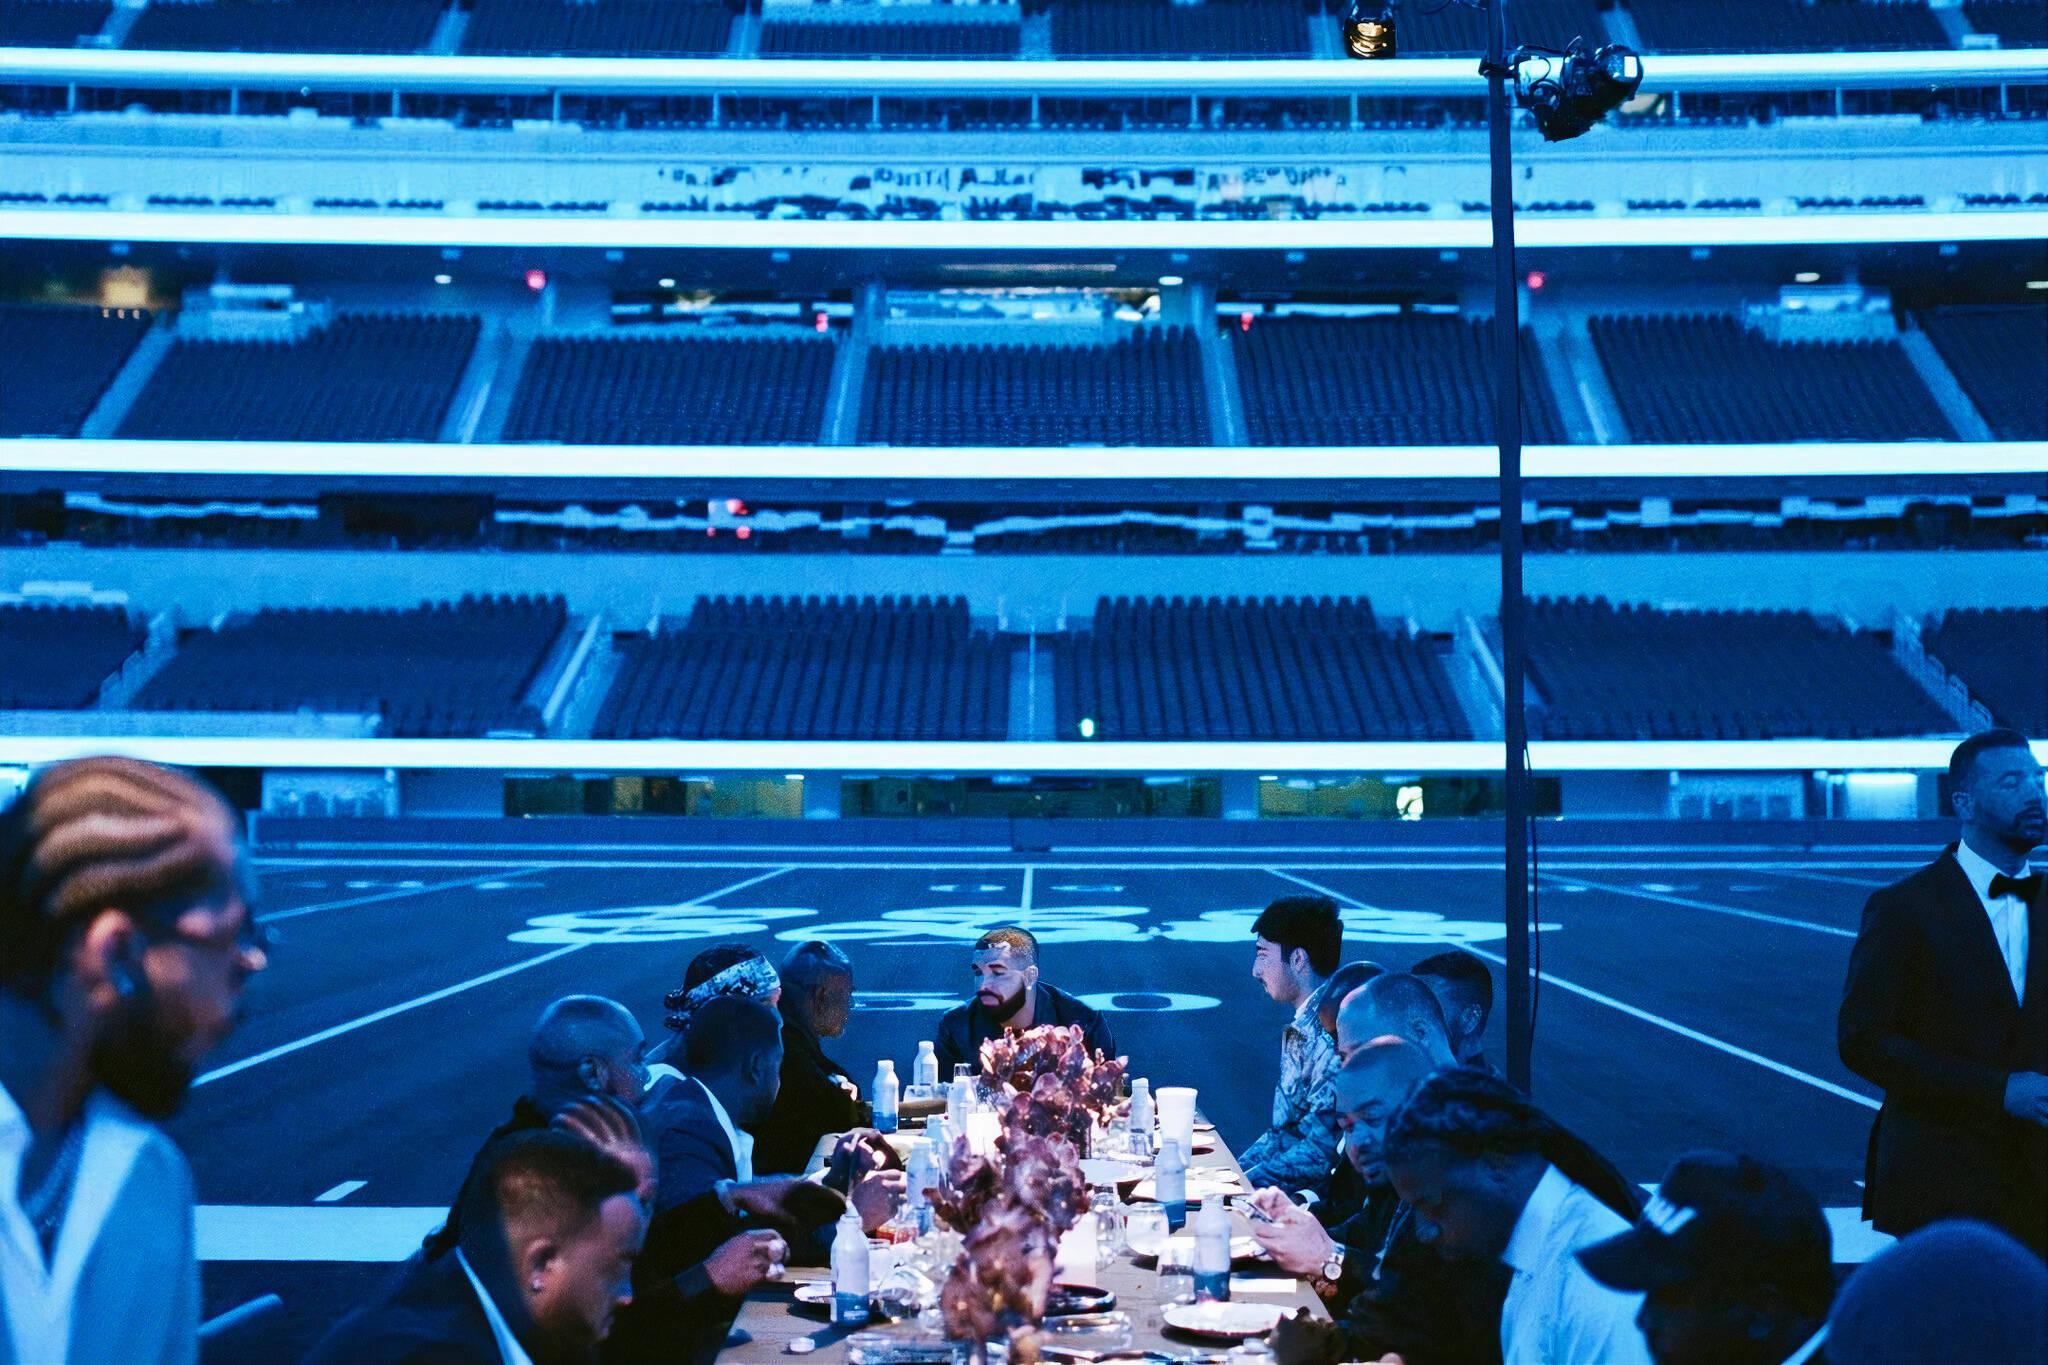 Drake casually rents 70Kseat stadium for intimate dinner party after